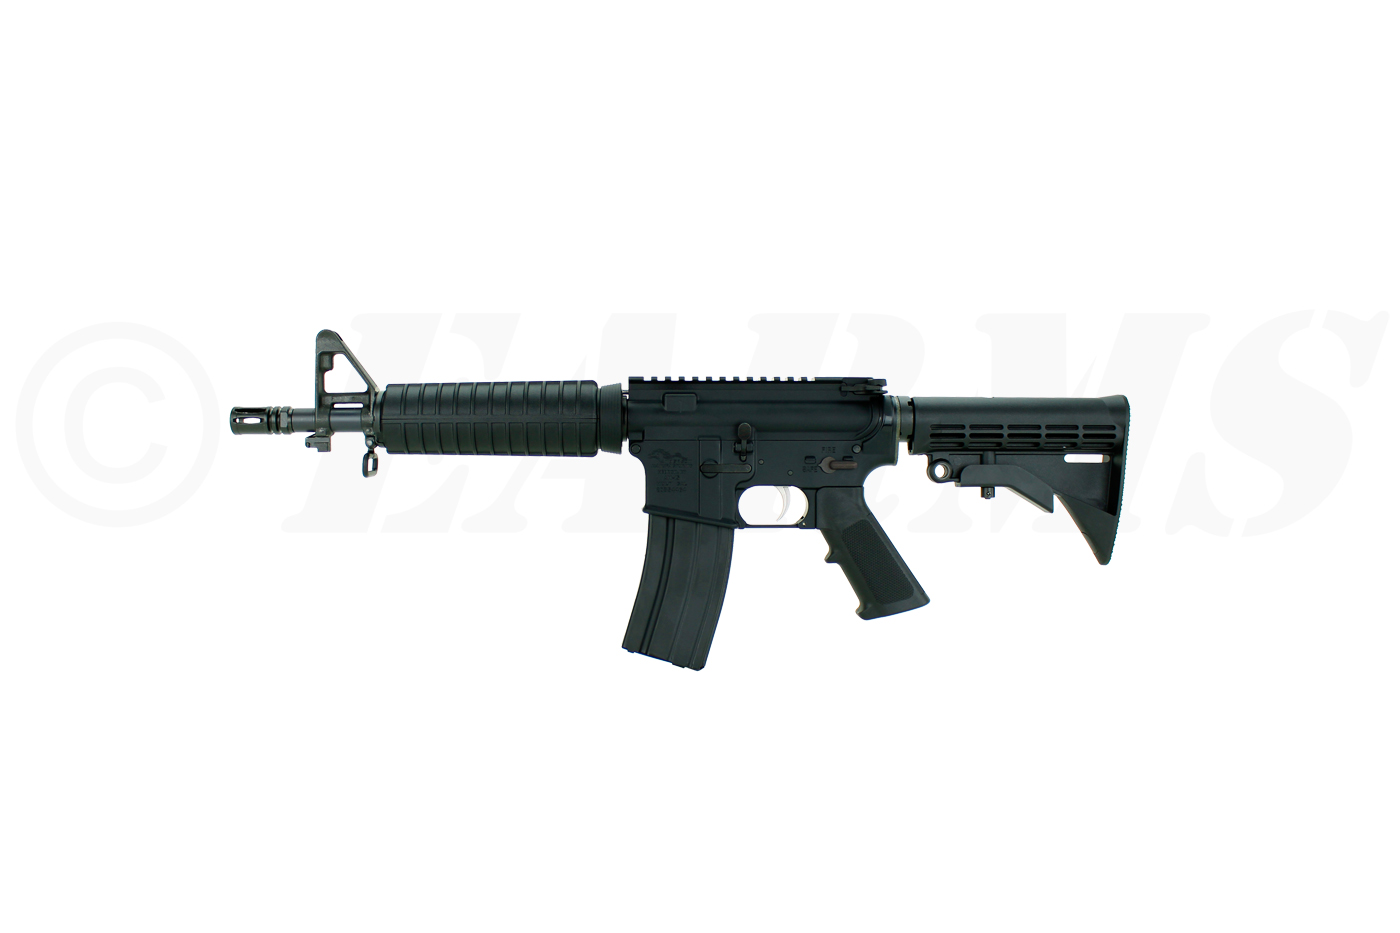 ANDERSON-ARMS-MANUFACTURING-AM-15-AOR-PISTOL-M-LOK-5-56-NATO-223-REM